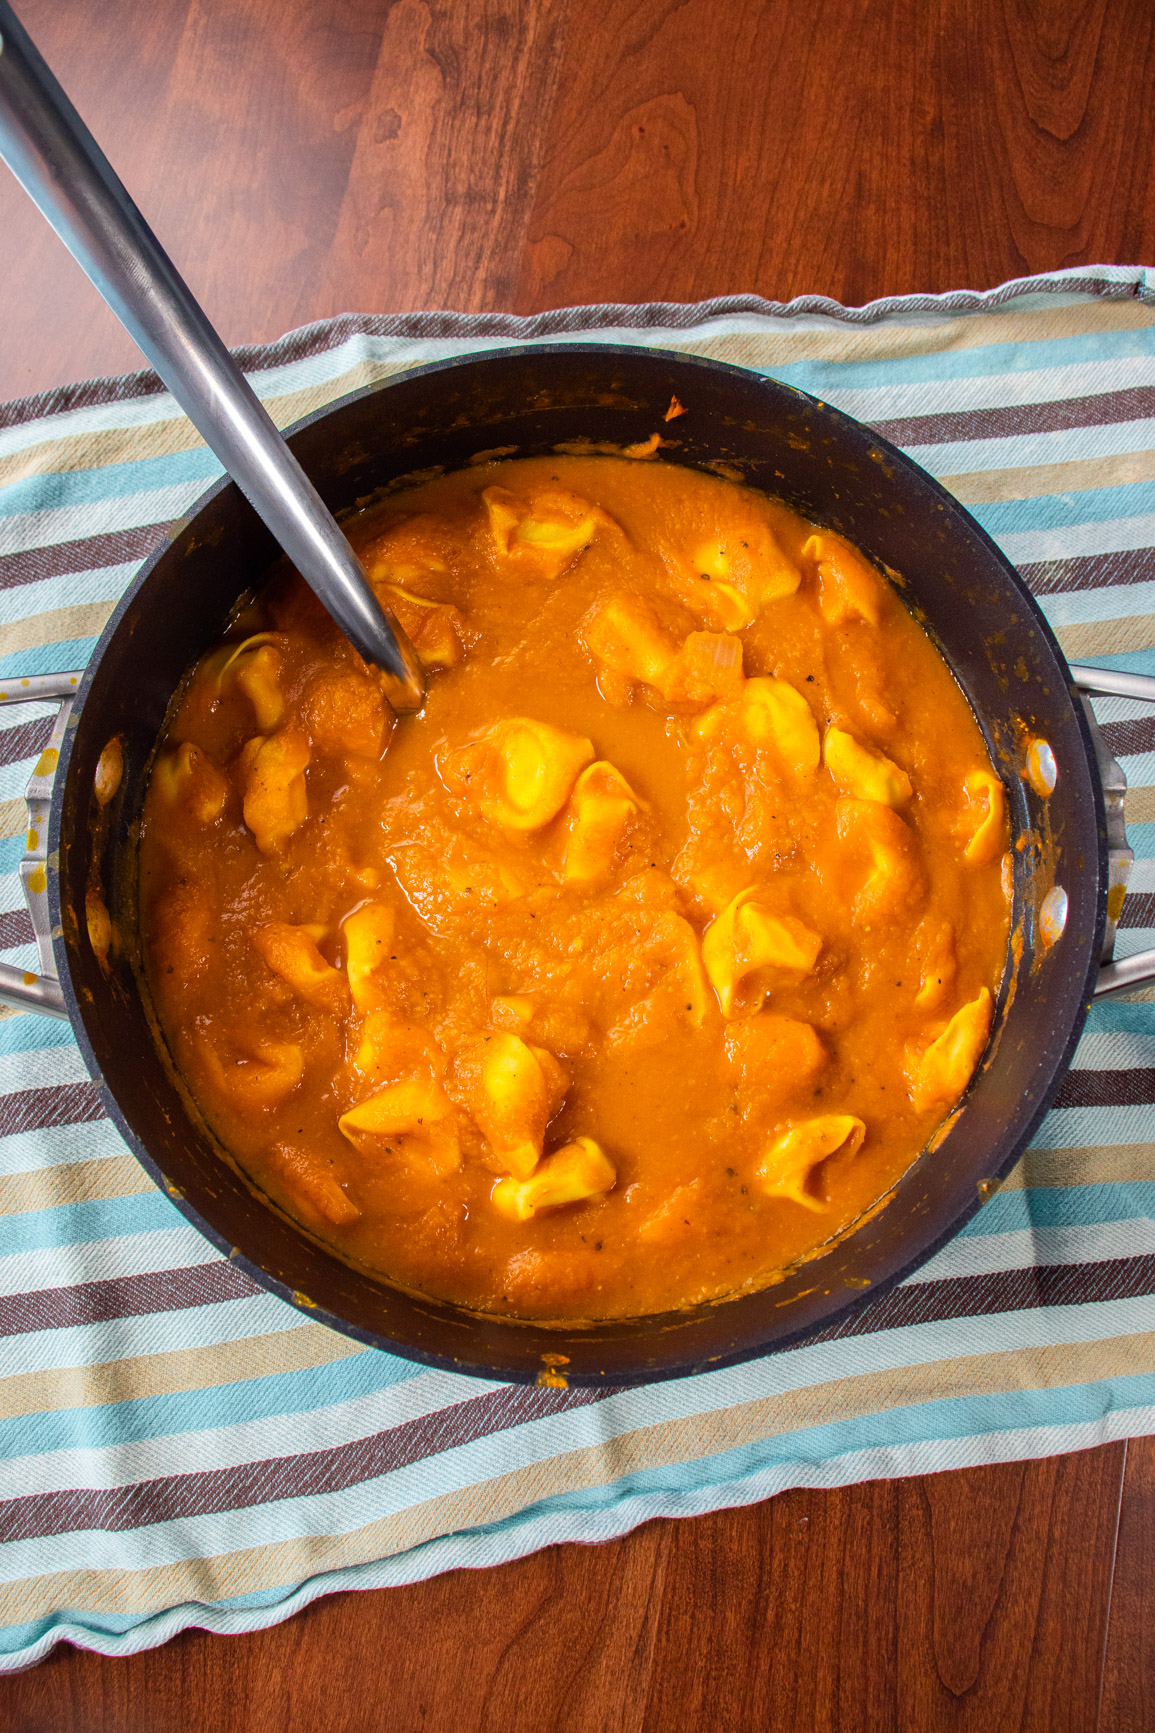 https://12tomatoes.com/pumpkin-soup-with-tortellini/